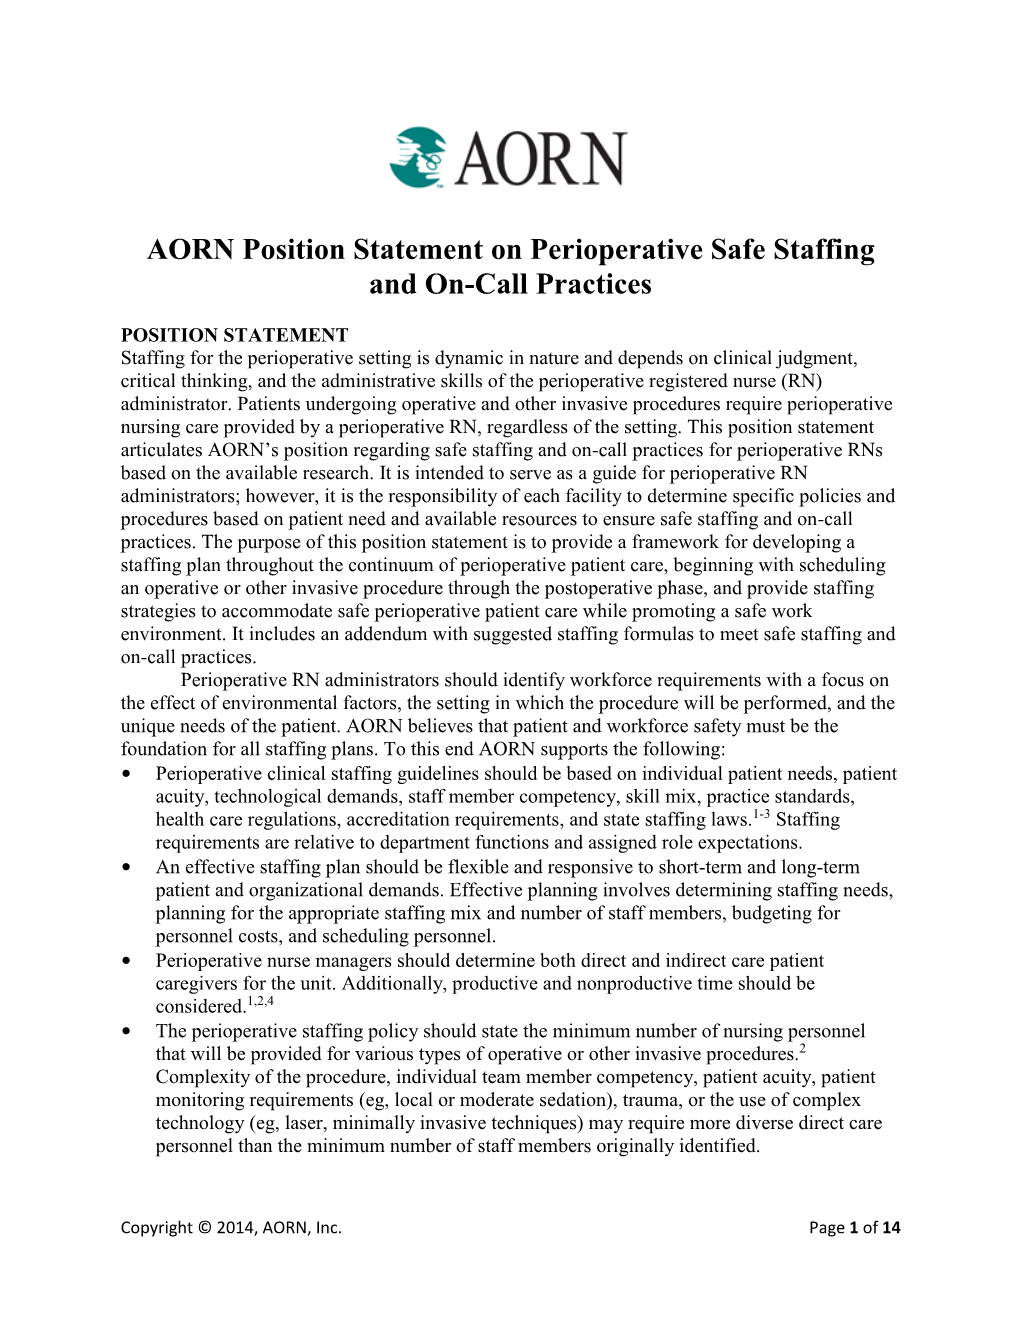 AORN Position Statement for Safe Staffing and On-Call Practices